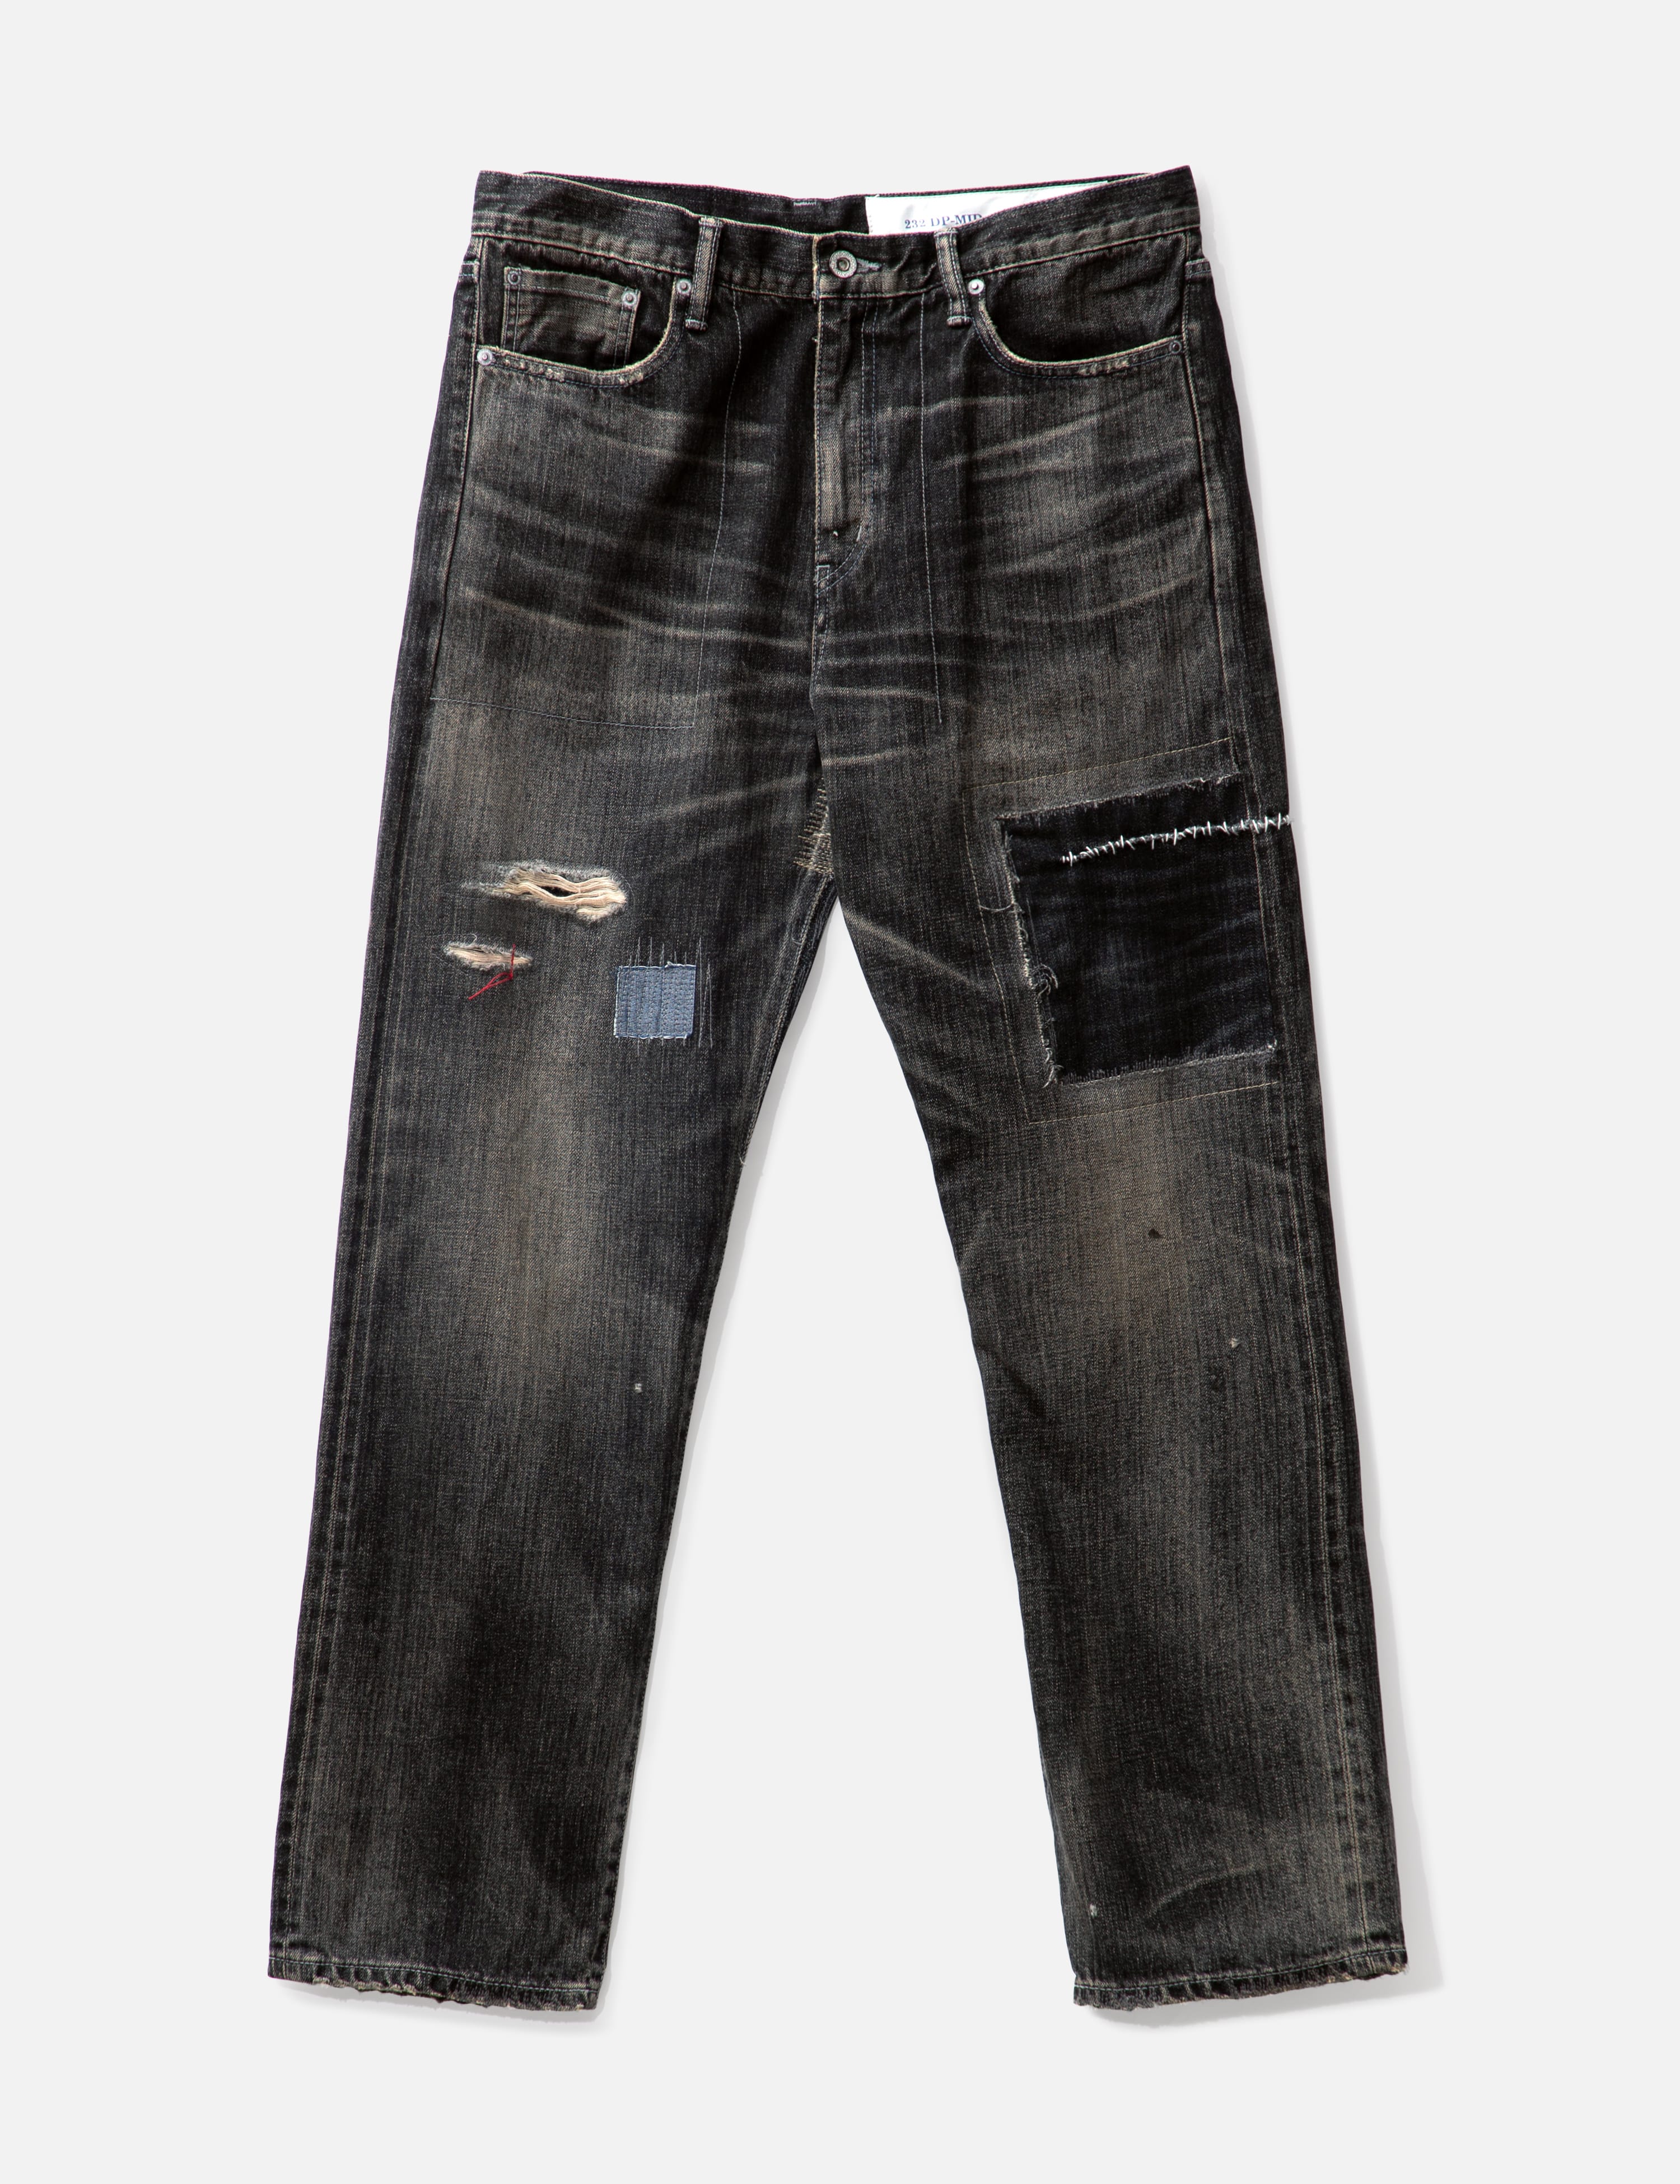 Slim Fit Ripped Men Blue Scratched Denim Jeans at Rs 750/piece in Jhajjar |  ID: 2849752590755